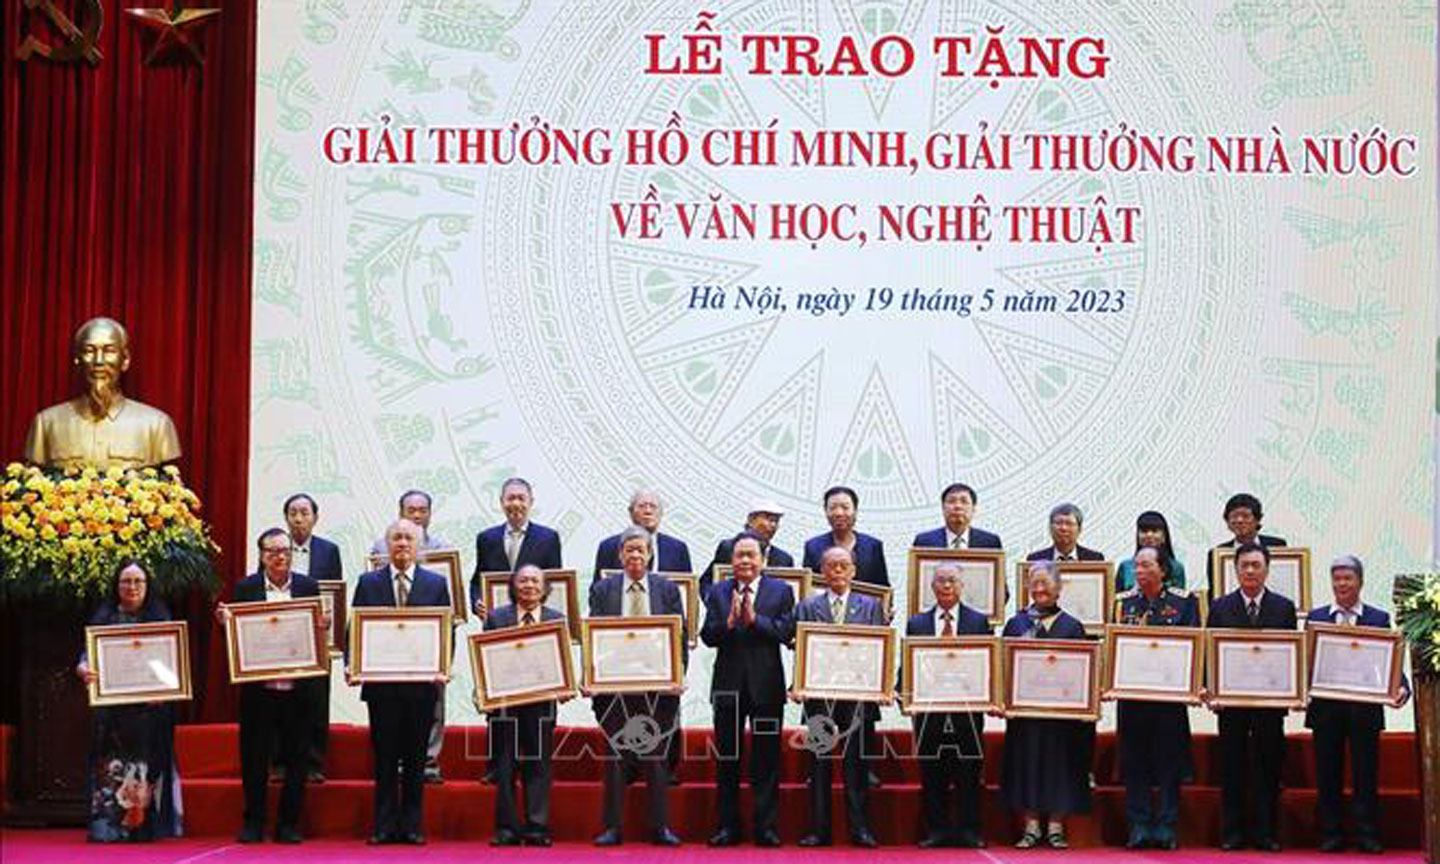 Funding for payment of prize for Ho Chi Minh Prize, State Prize for literature and art in Vietnam